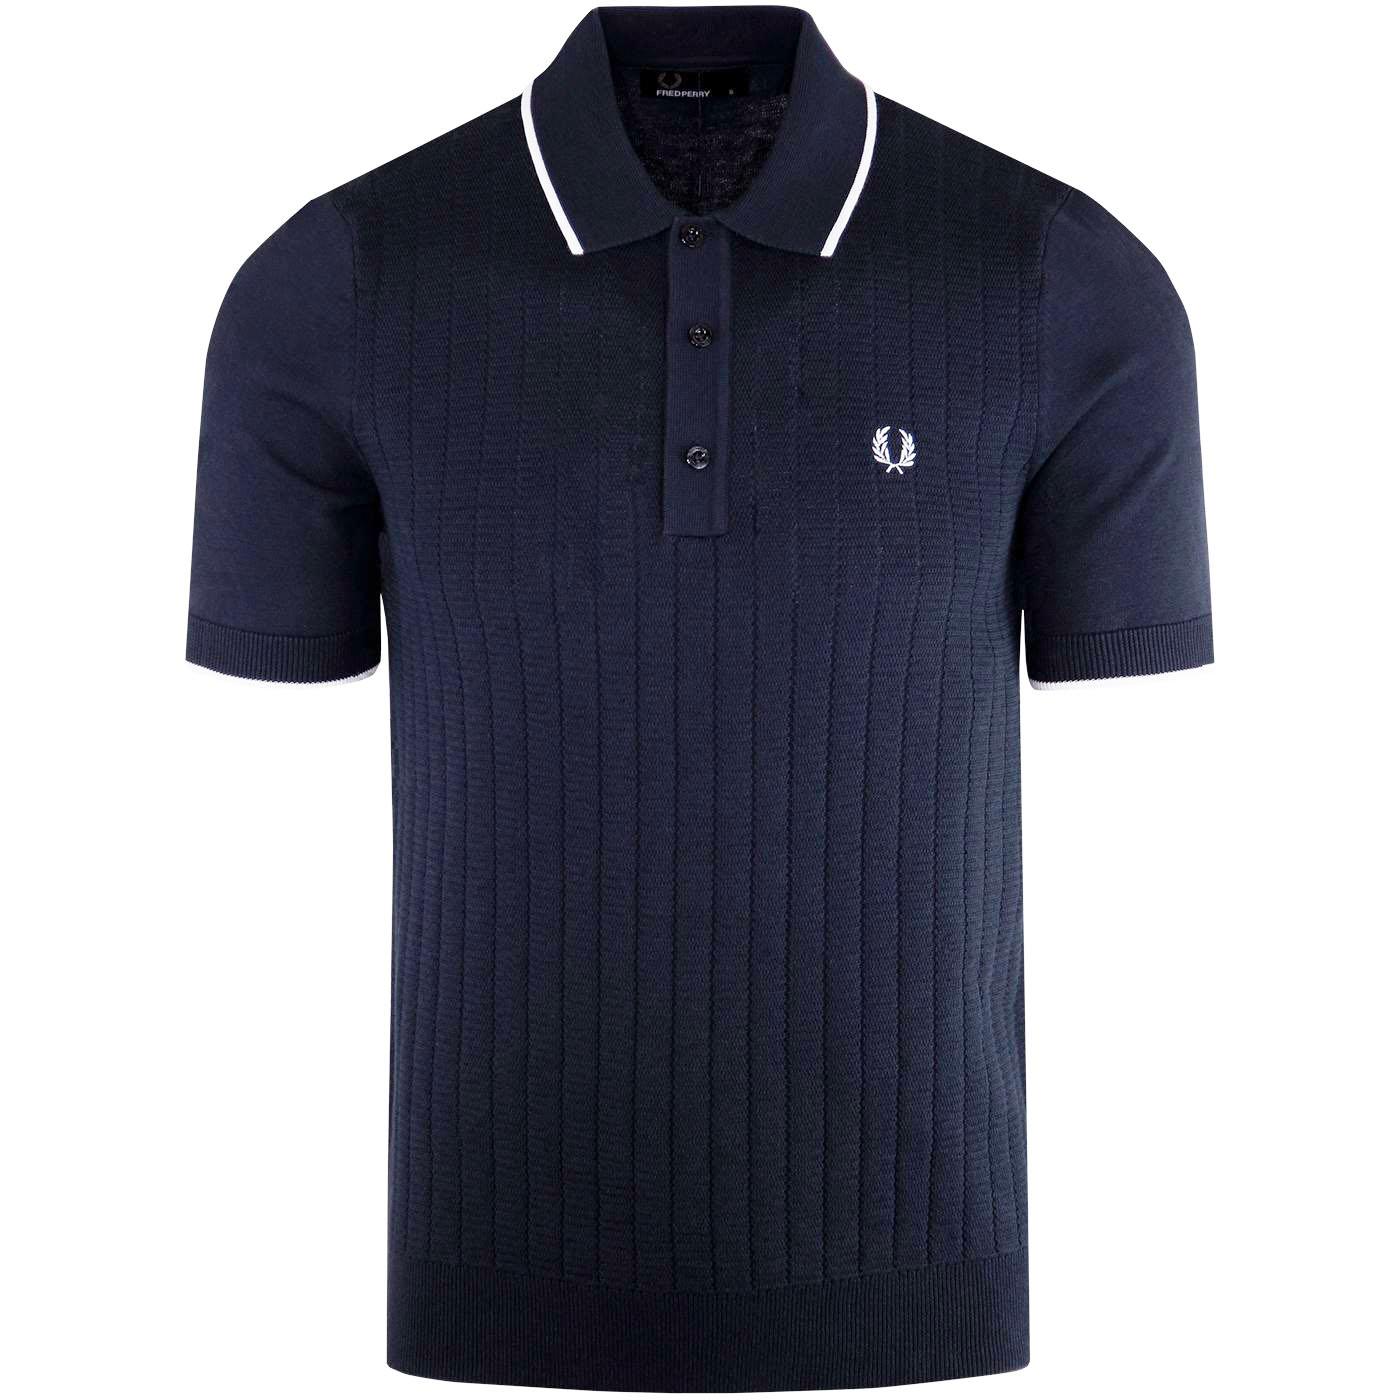 raíz varilla Escepticismo FRED PERRY 60s Mod Texture Front Knitted Polo Shirt Carbon